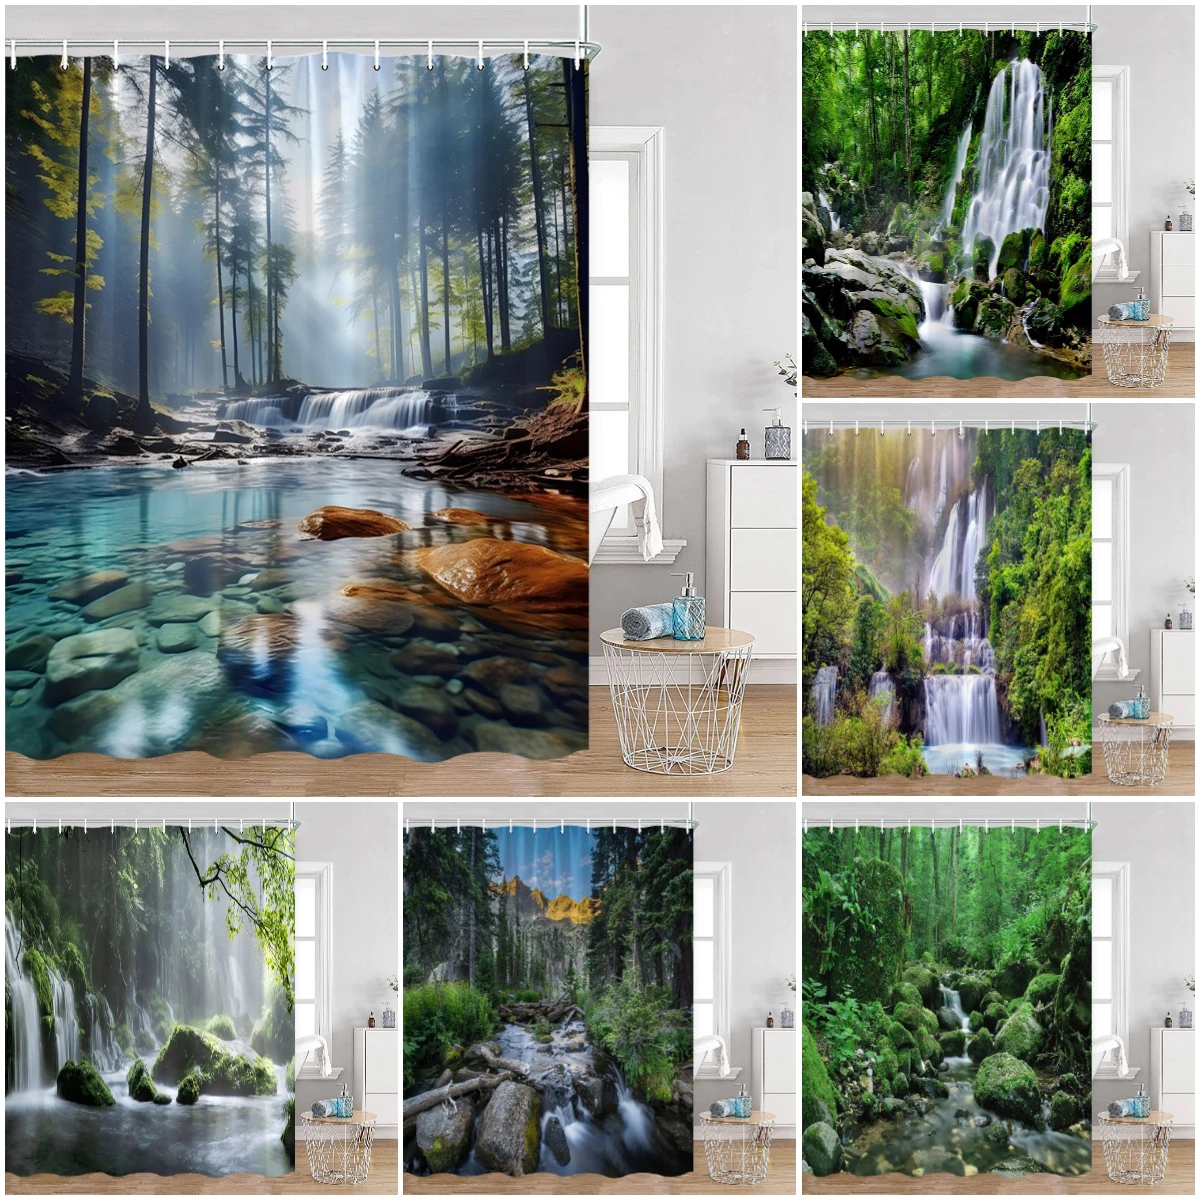 

Natural Landscape Shower Curtains Waterfall Forest Green Plants Nature Scenery Bathroom Decor Polyester Fabric Bath Curtain